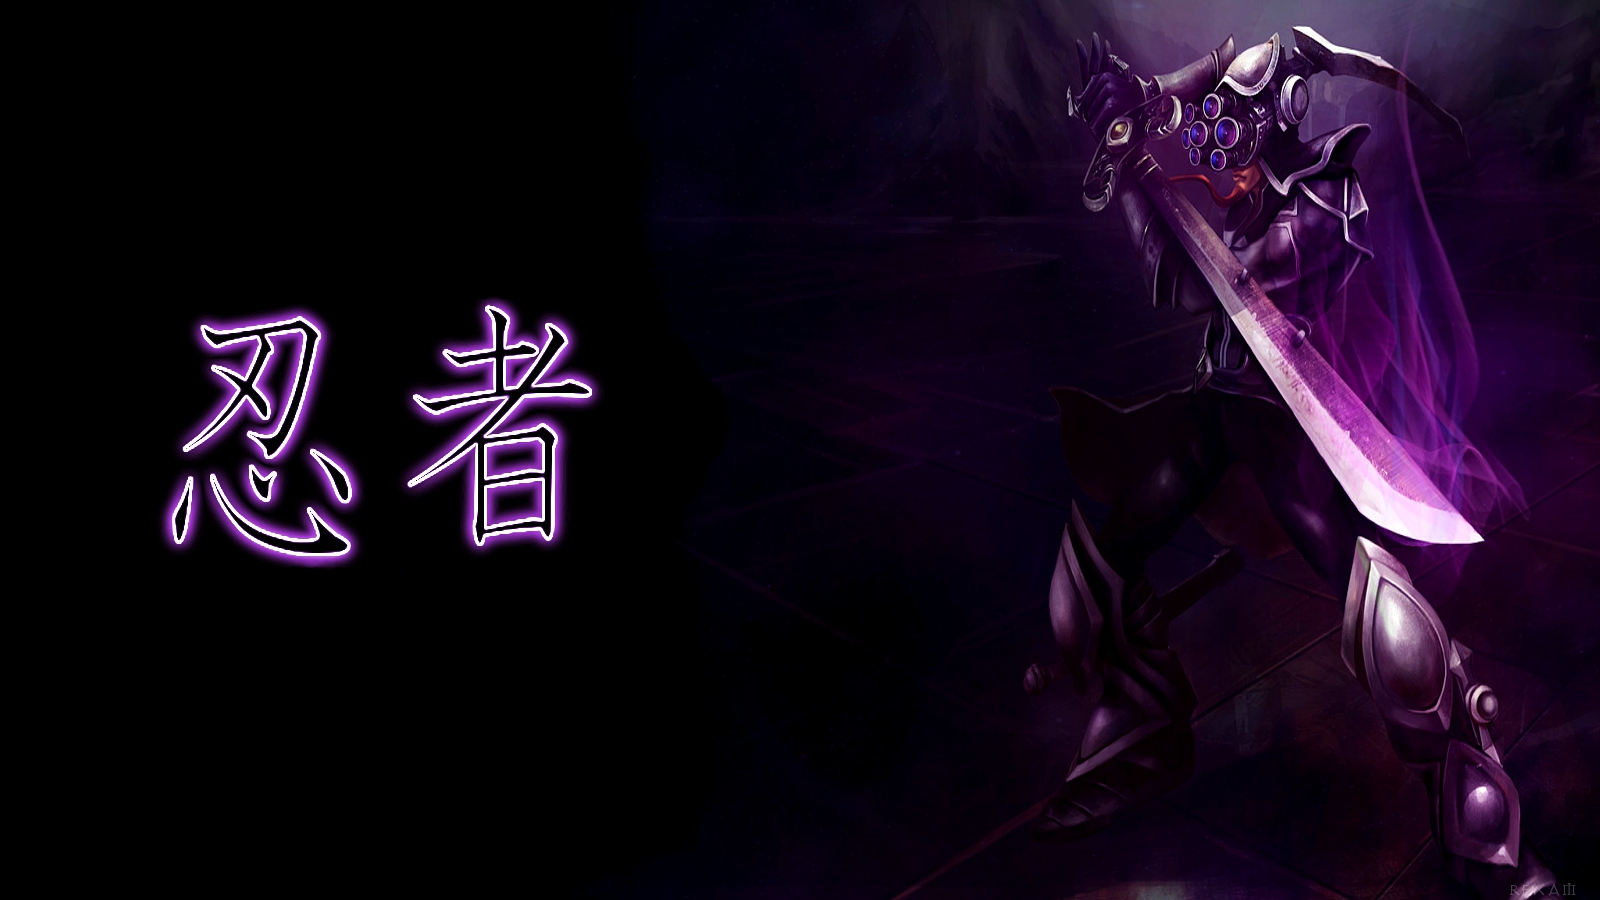 video game, league of legends, master yi (league of legends)